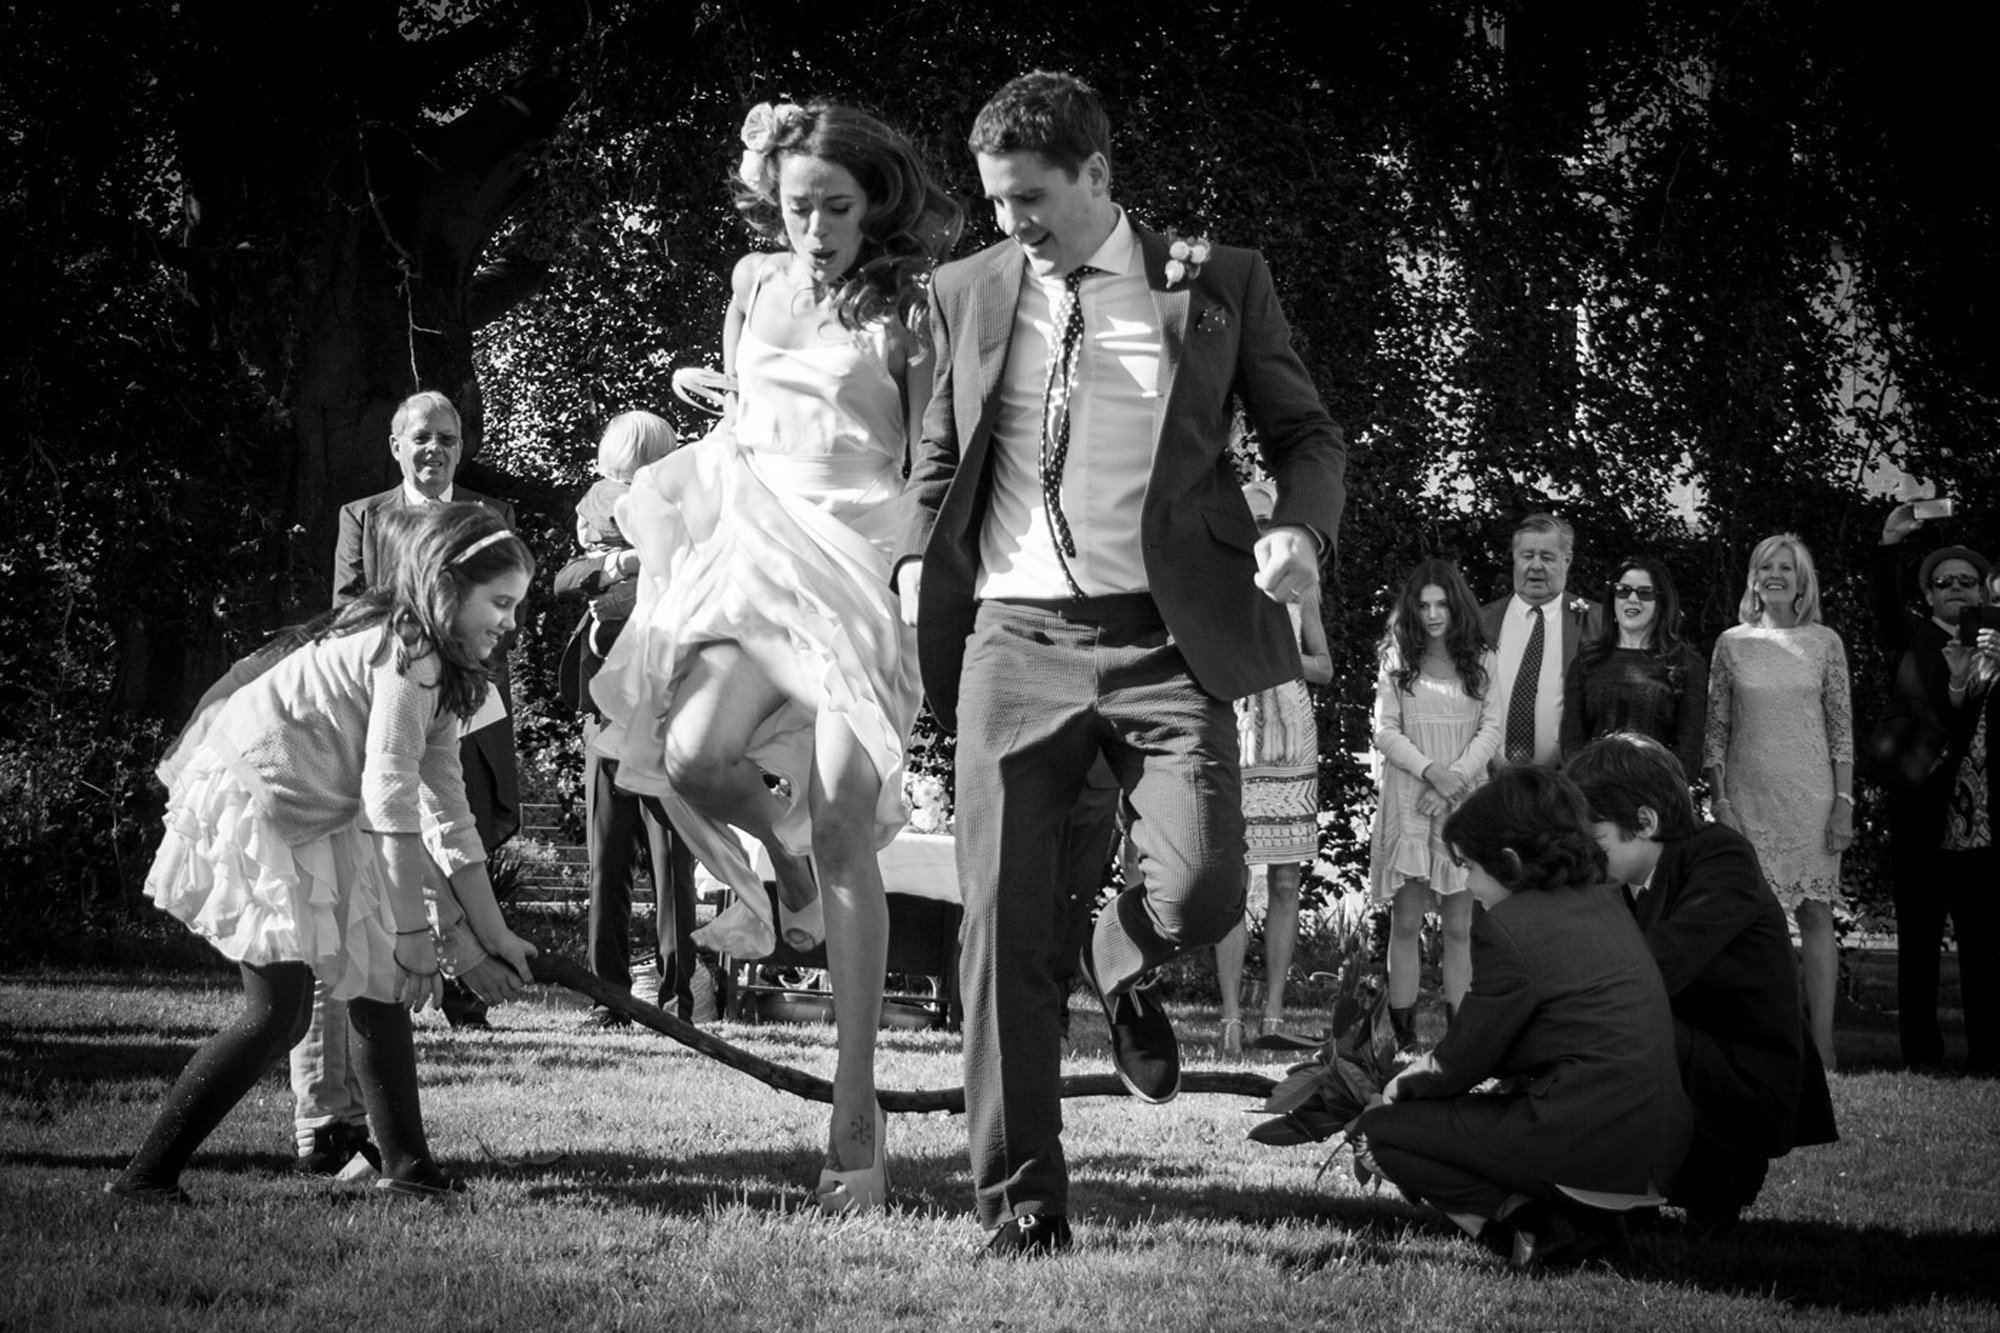 Jumping the broom ceremony- bride and groom jump over a stick held by two children on the lawn outside their festival wedding venue elmore court